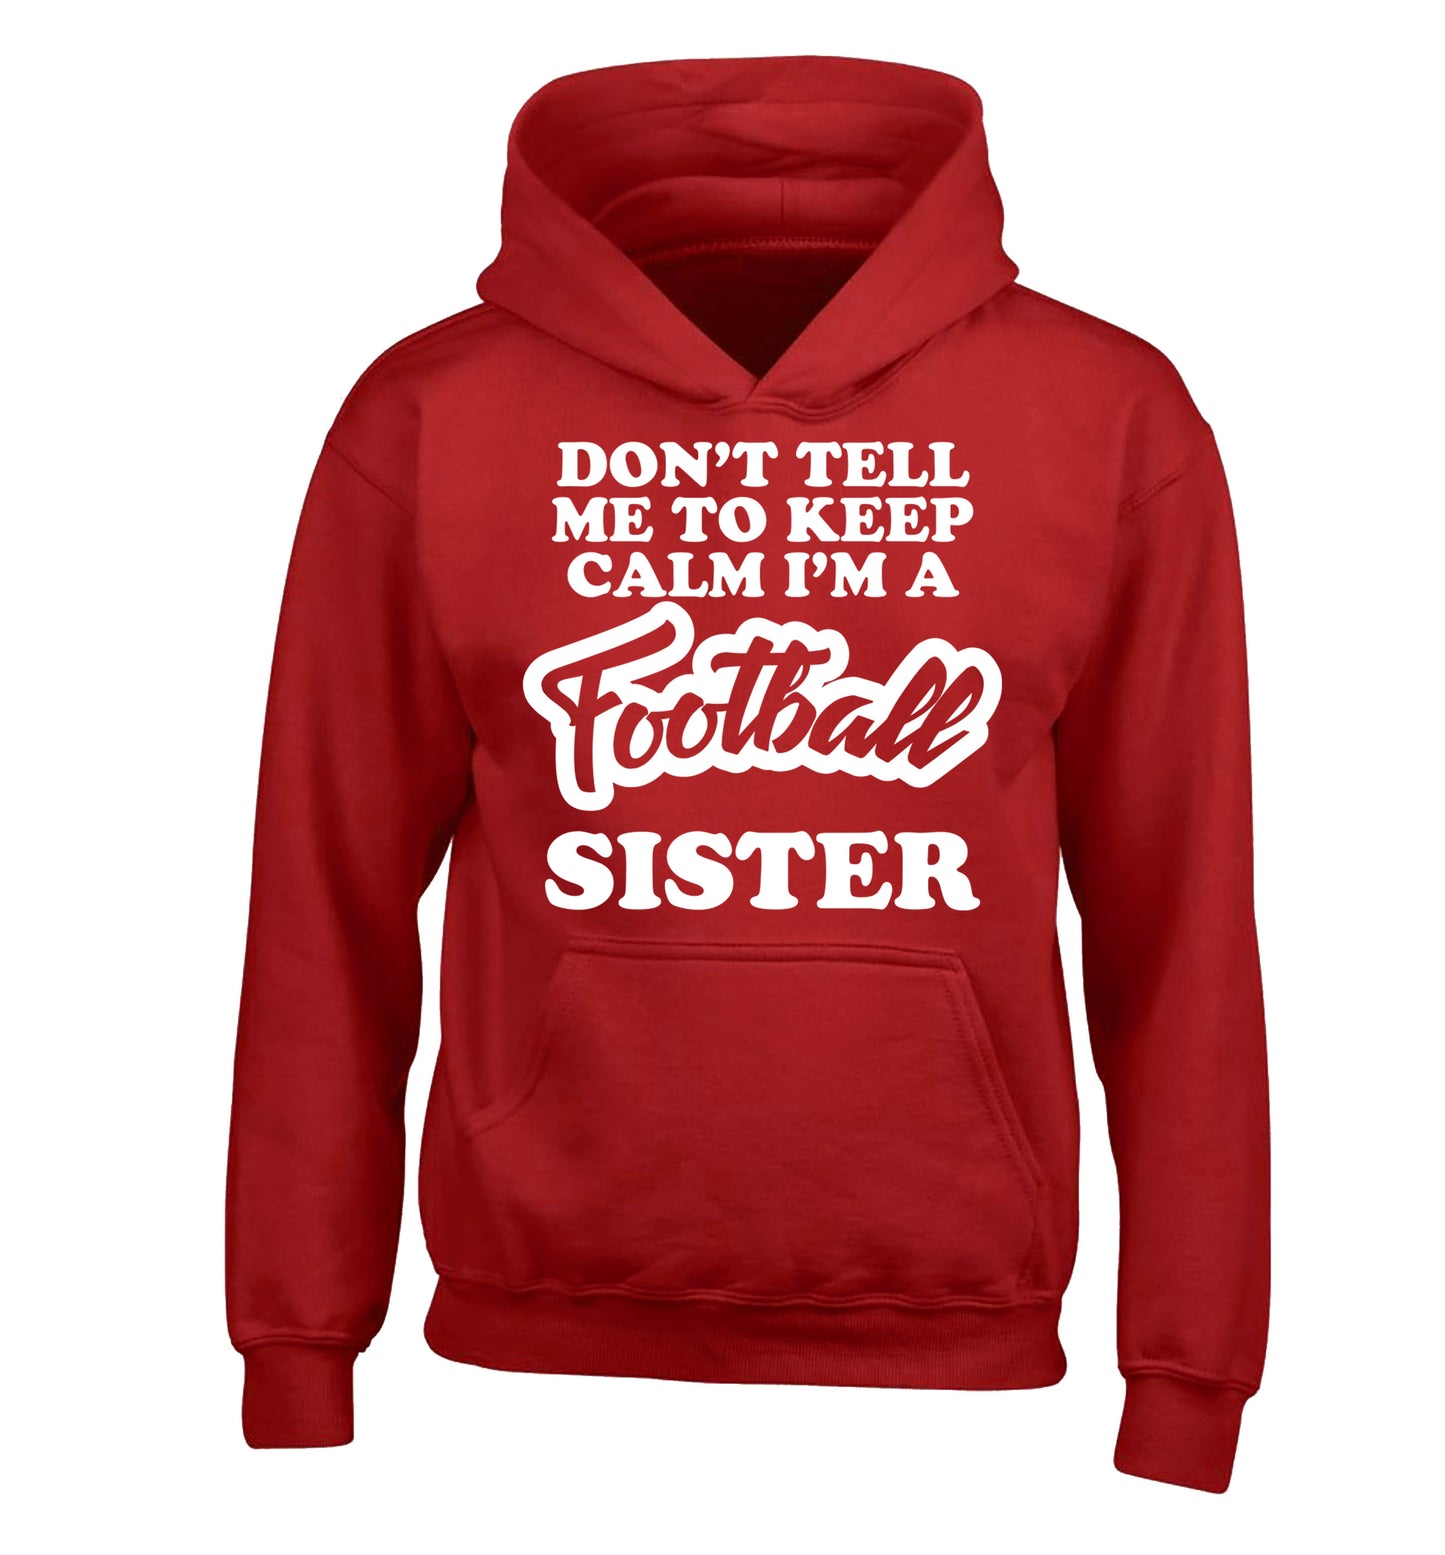 Don't tell me to keep calm I'm a football sister children's red hoodie 12-14 Years